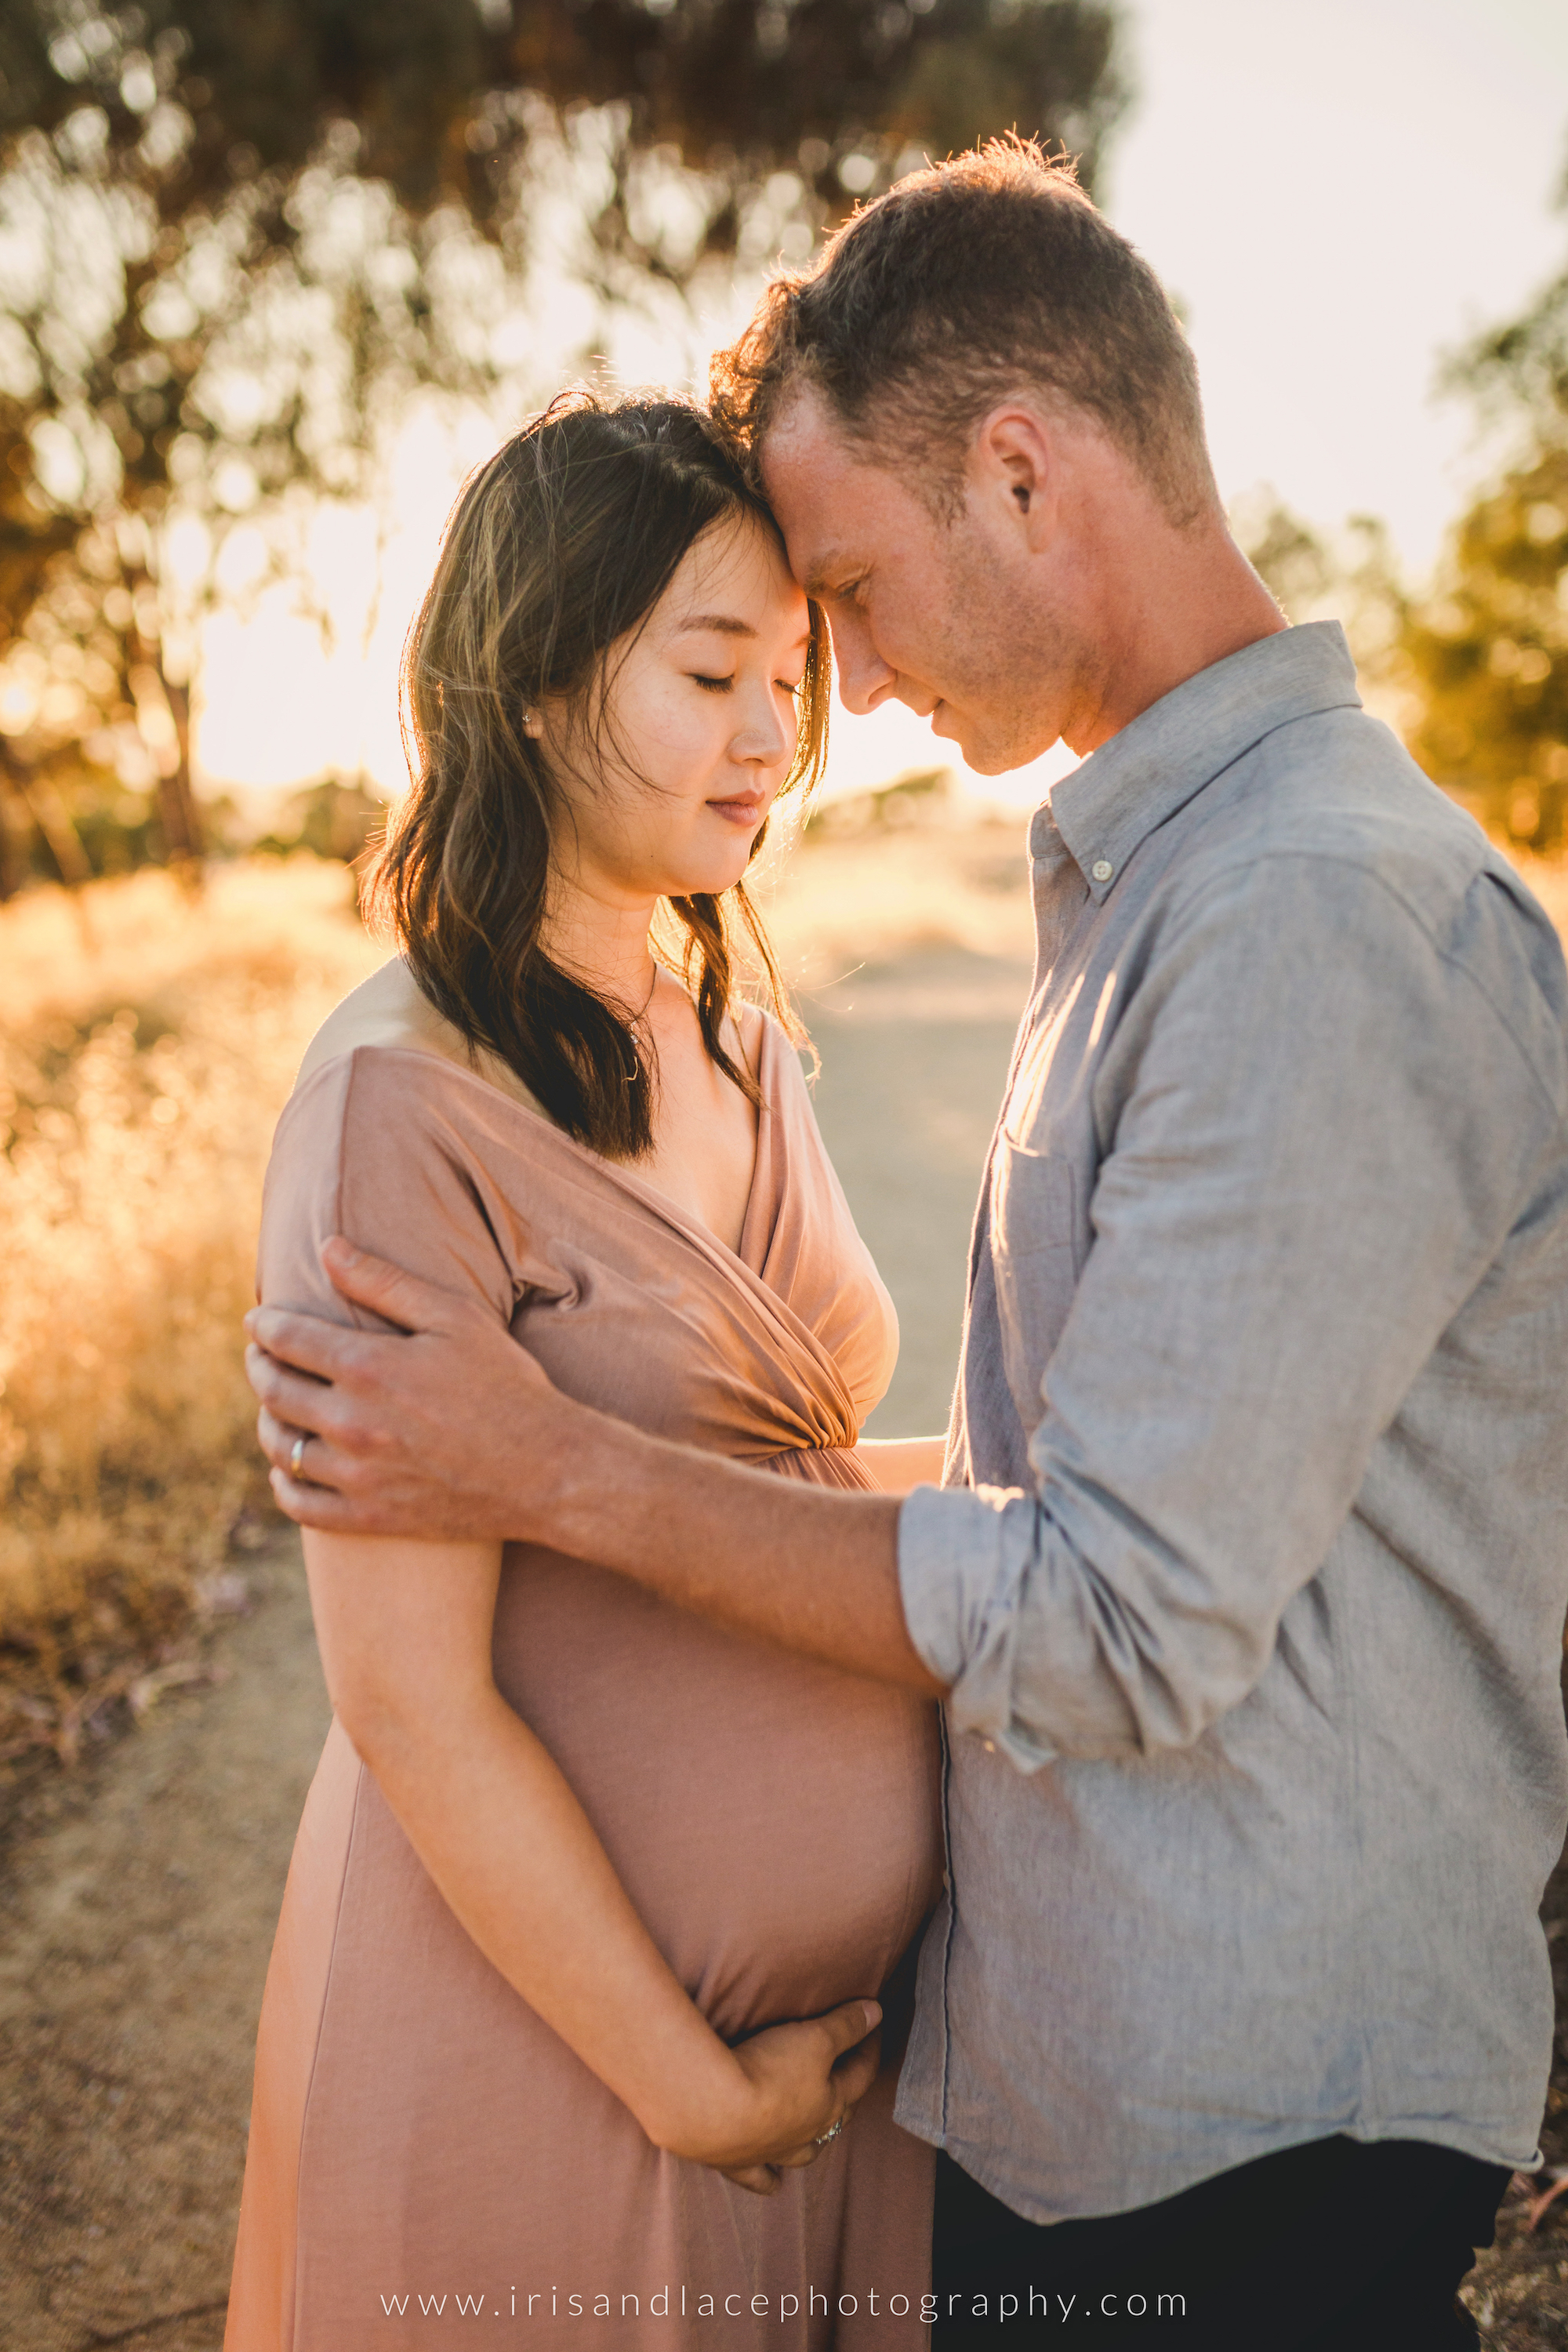 Father and Mother embrace during pregnancy photoshoot